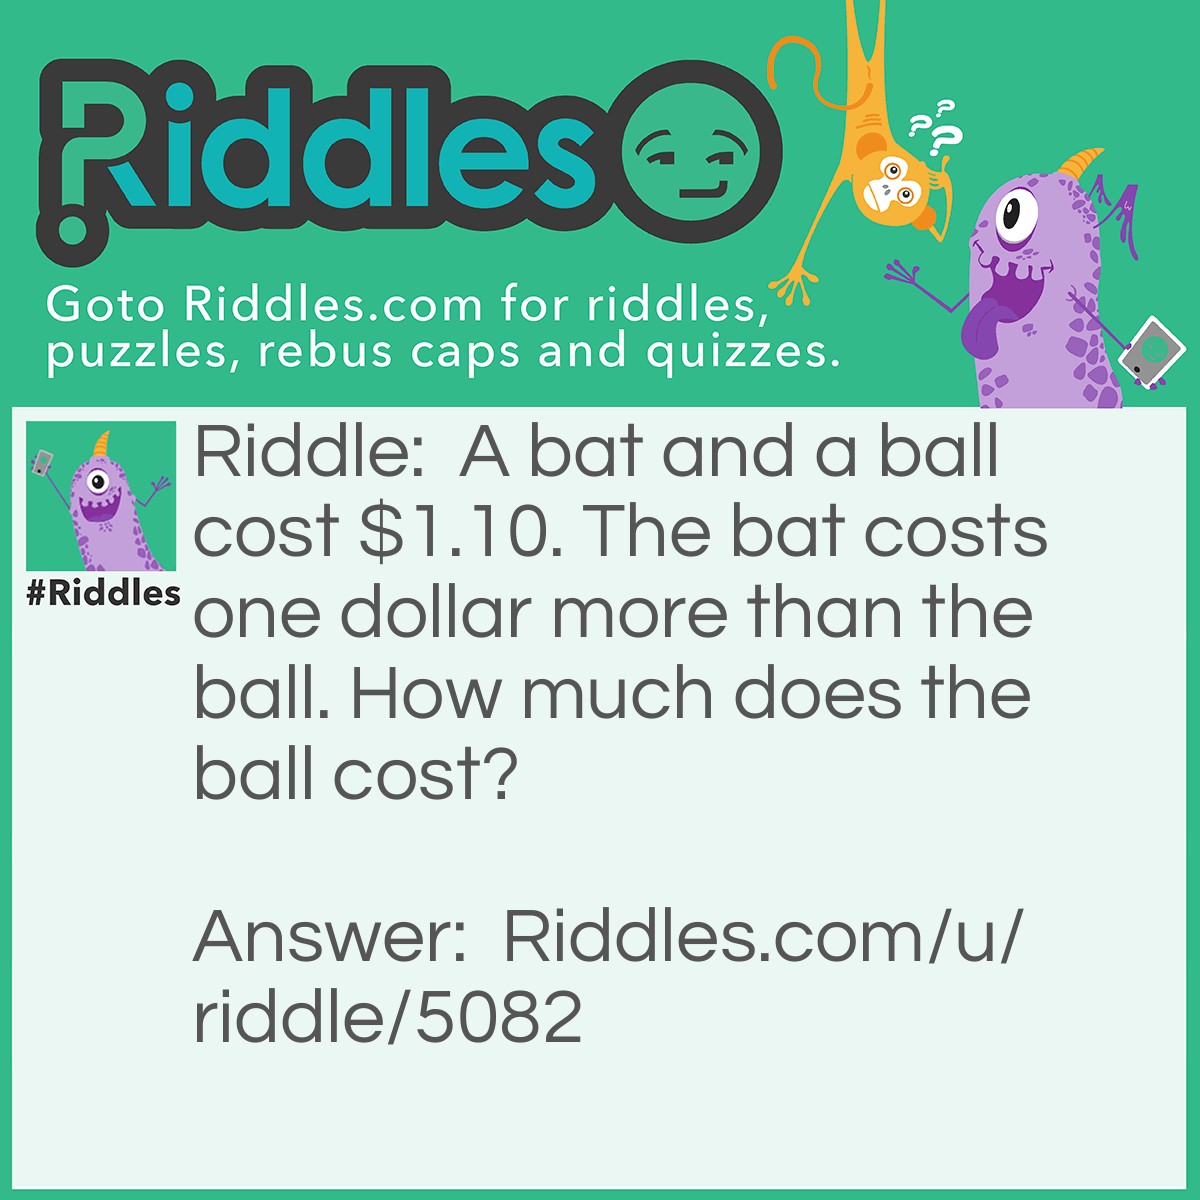 Riddle: A bat and a ball cost $1.10. The bat costs one dollar more than the ball. How much does the ball cost? Answer: The ball costs 5c. Not 10c. One dollar more than 10c is $1.10, $1.10 + 10c is $1.20 One dollar more than 5c is $1.05. The sum of which is $1.10